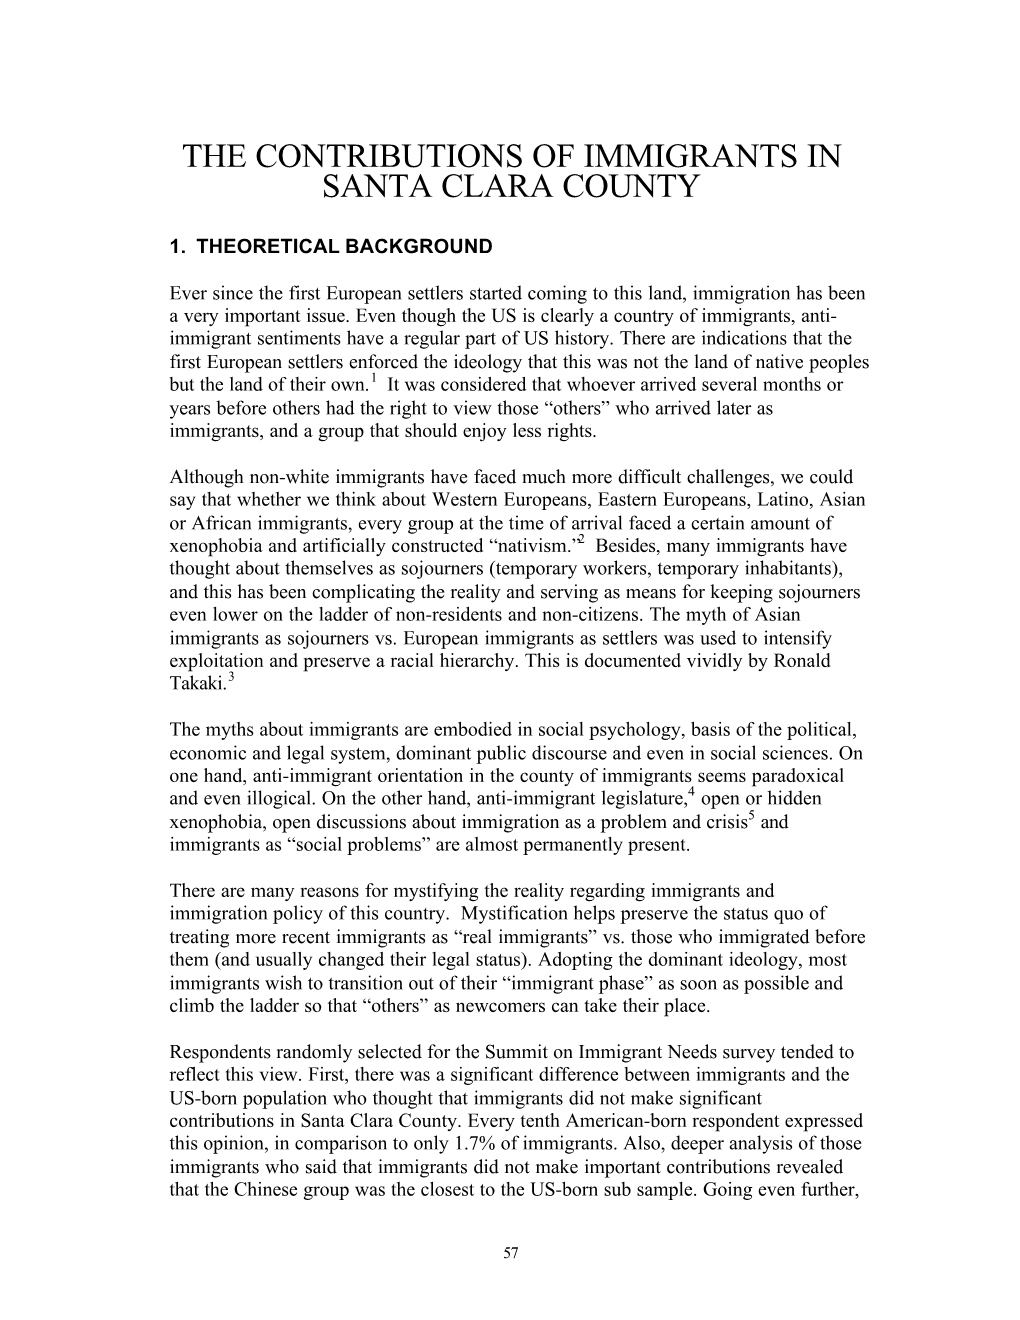 The Contributions of Immigrants in Santa Clara County